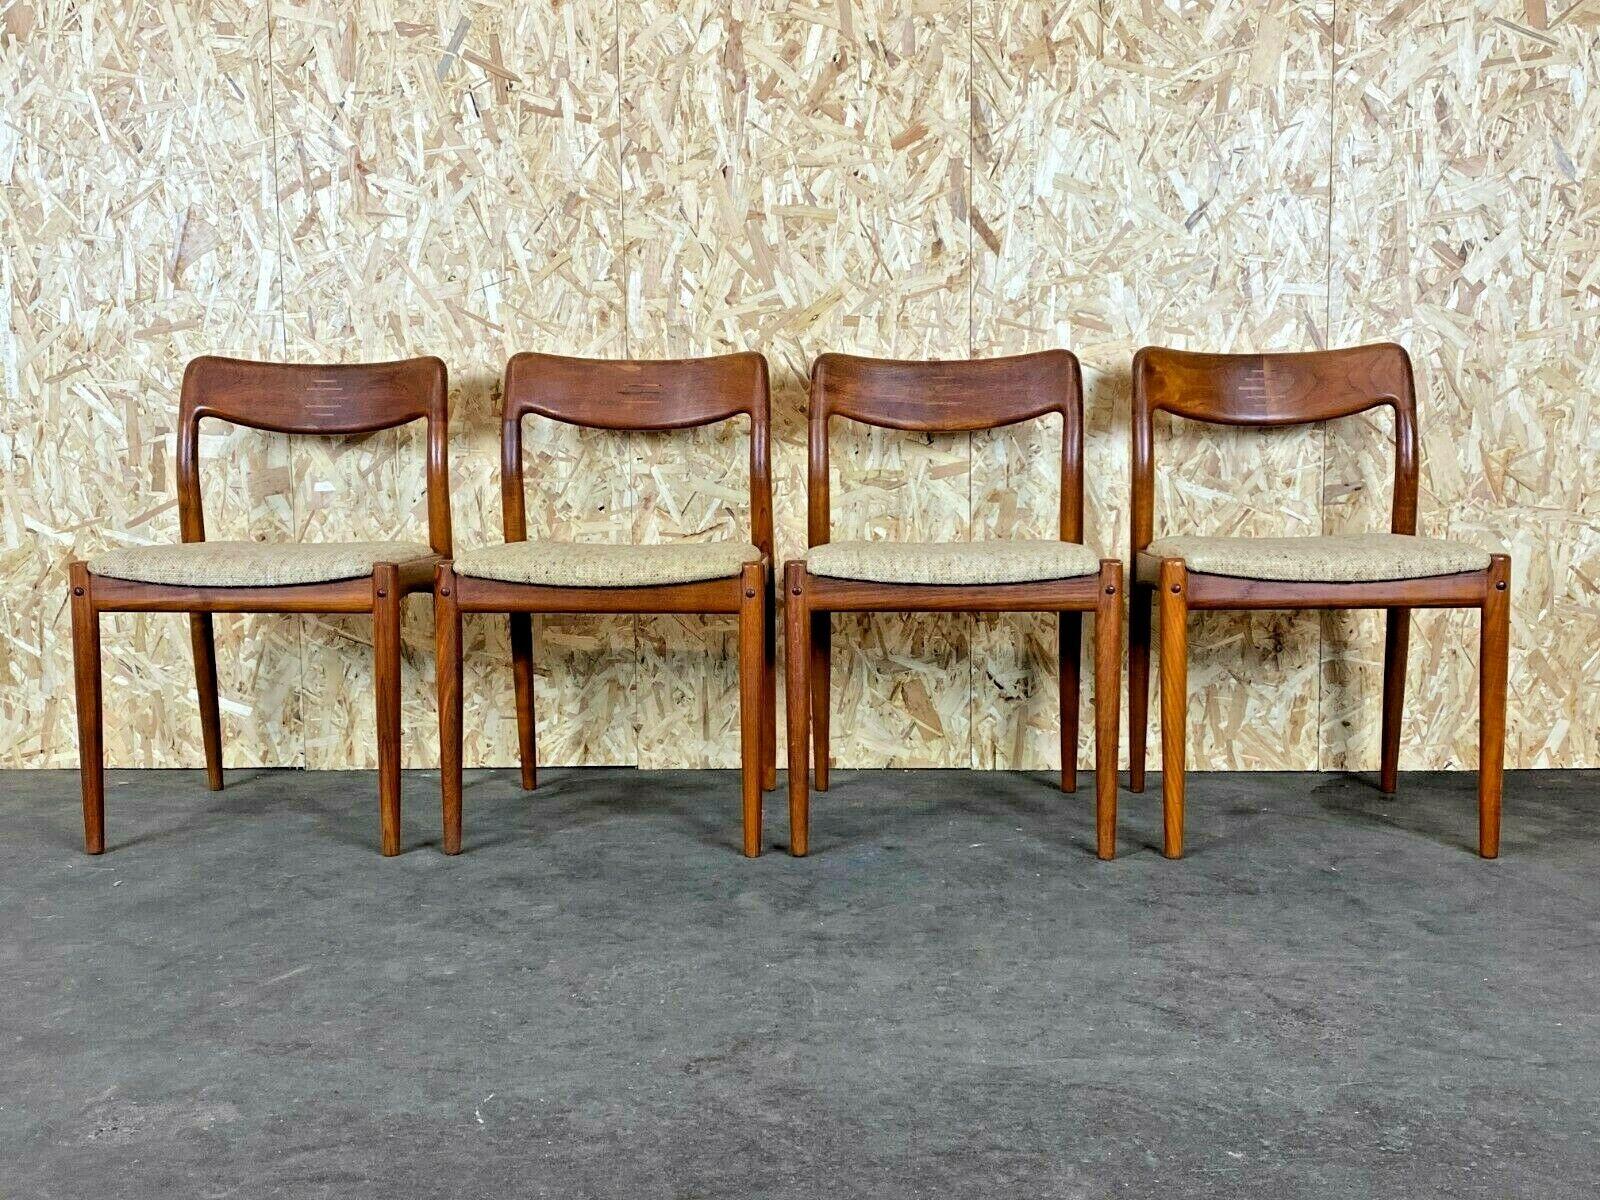 4x 60s 70s teak chairs chair Johannes Andersen for Uldum Møbelfabrik 60s

Object: 4x chair

Manufacturer: Uldum

Condition: good

Age: around 1960-1970

Dimensions:

50cm x 49cm x 77cm
Seat height = 45cm

Other notes:

The pictures